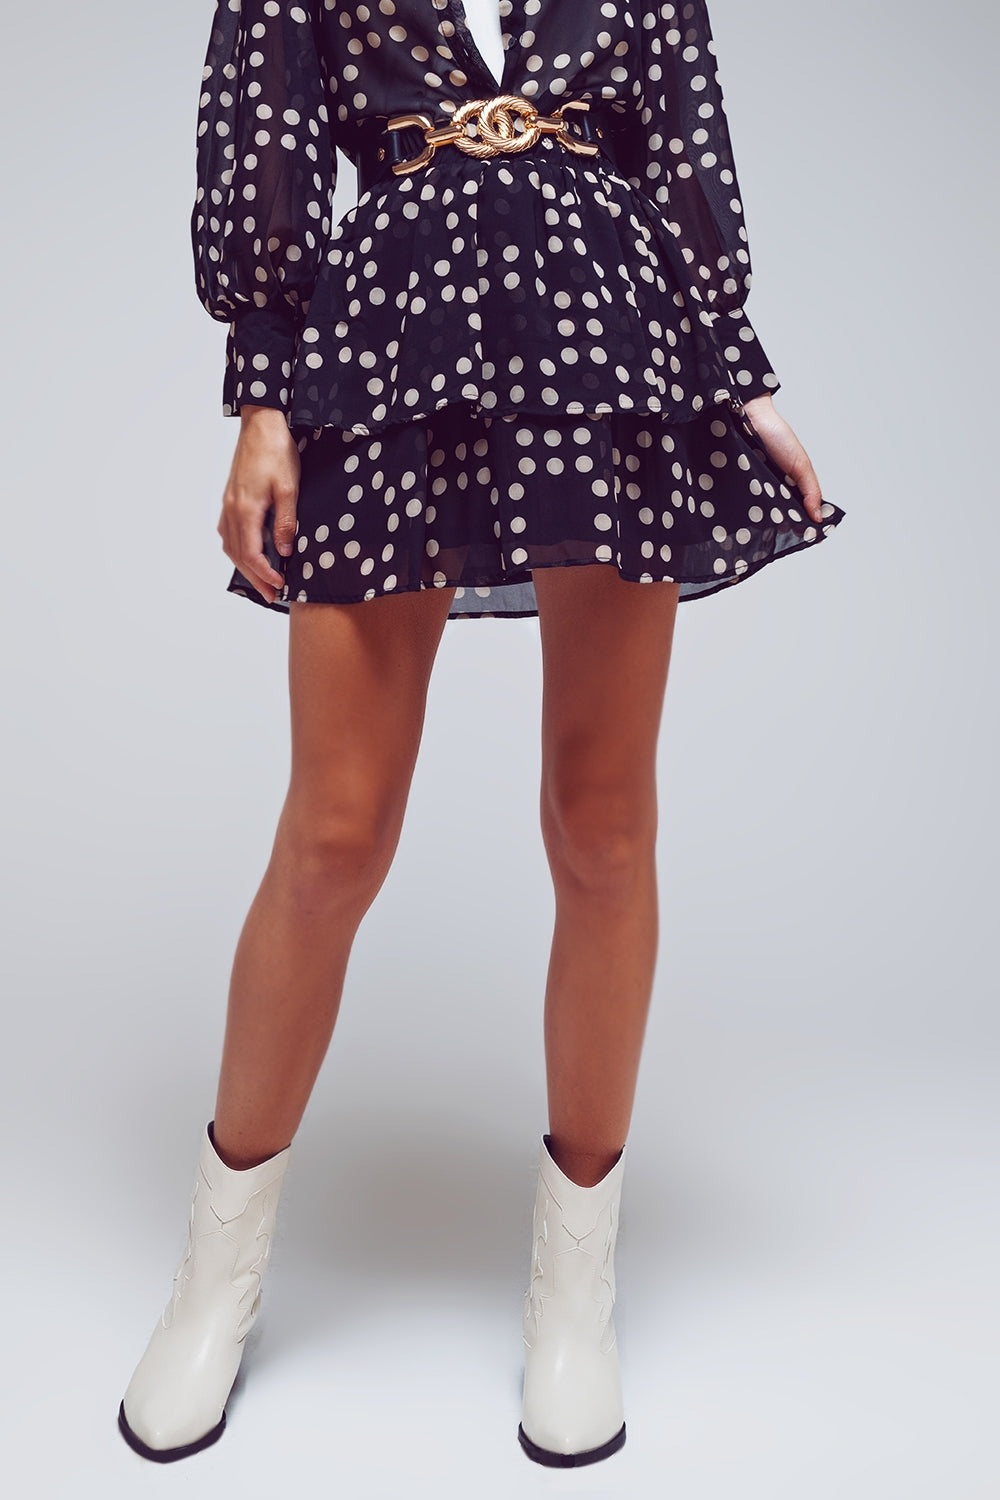 Q2 Tiered Mini Skirt in Black and Cream Polka Dots